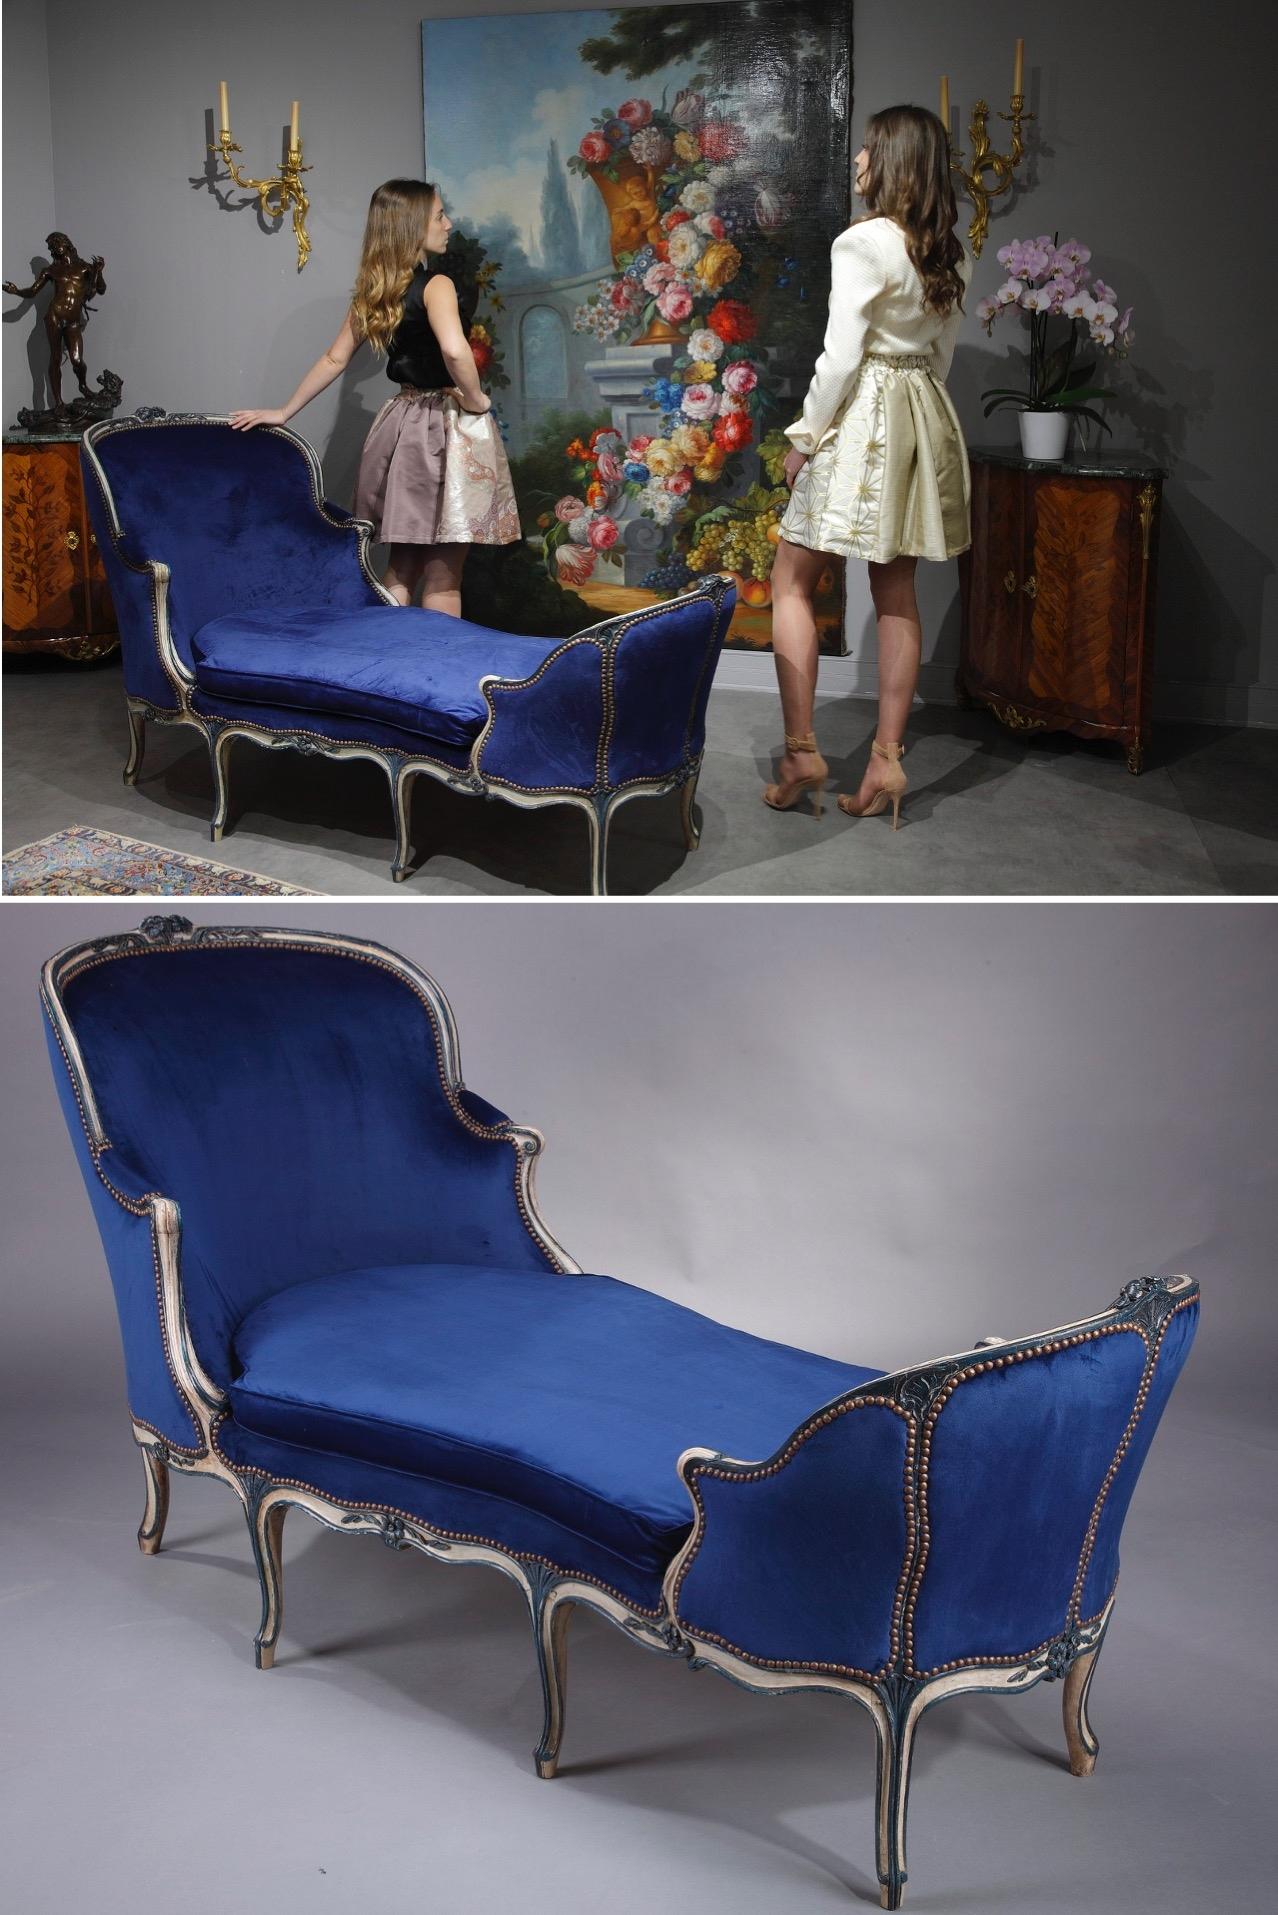 The splendor of the Louis XV period is captured in this magnificent duchesse by the famed French ébéniste Jean-René Nadal (1733-1783). Beautifully upholstered in blue velvet that complements the lacquered beige and light blue wood, this original